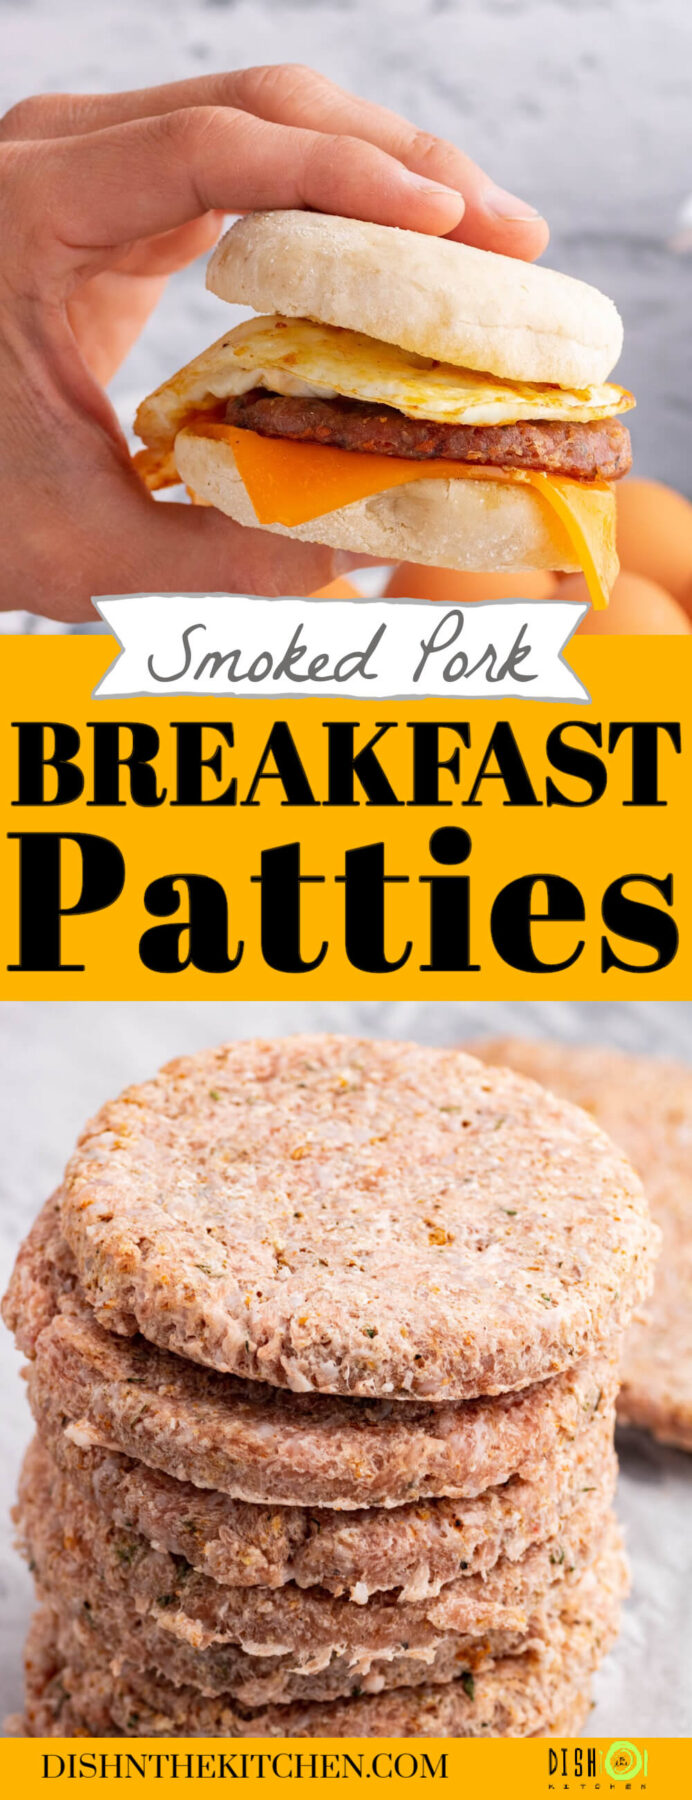 PInterest image of a hand holding a breakfast sandwich and a stack of smoked breakfast sausage patties.